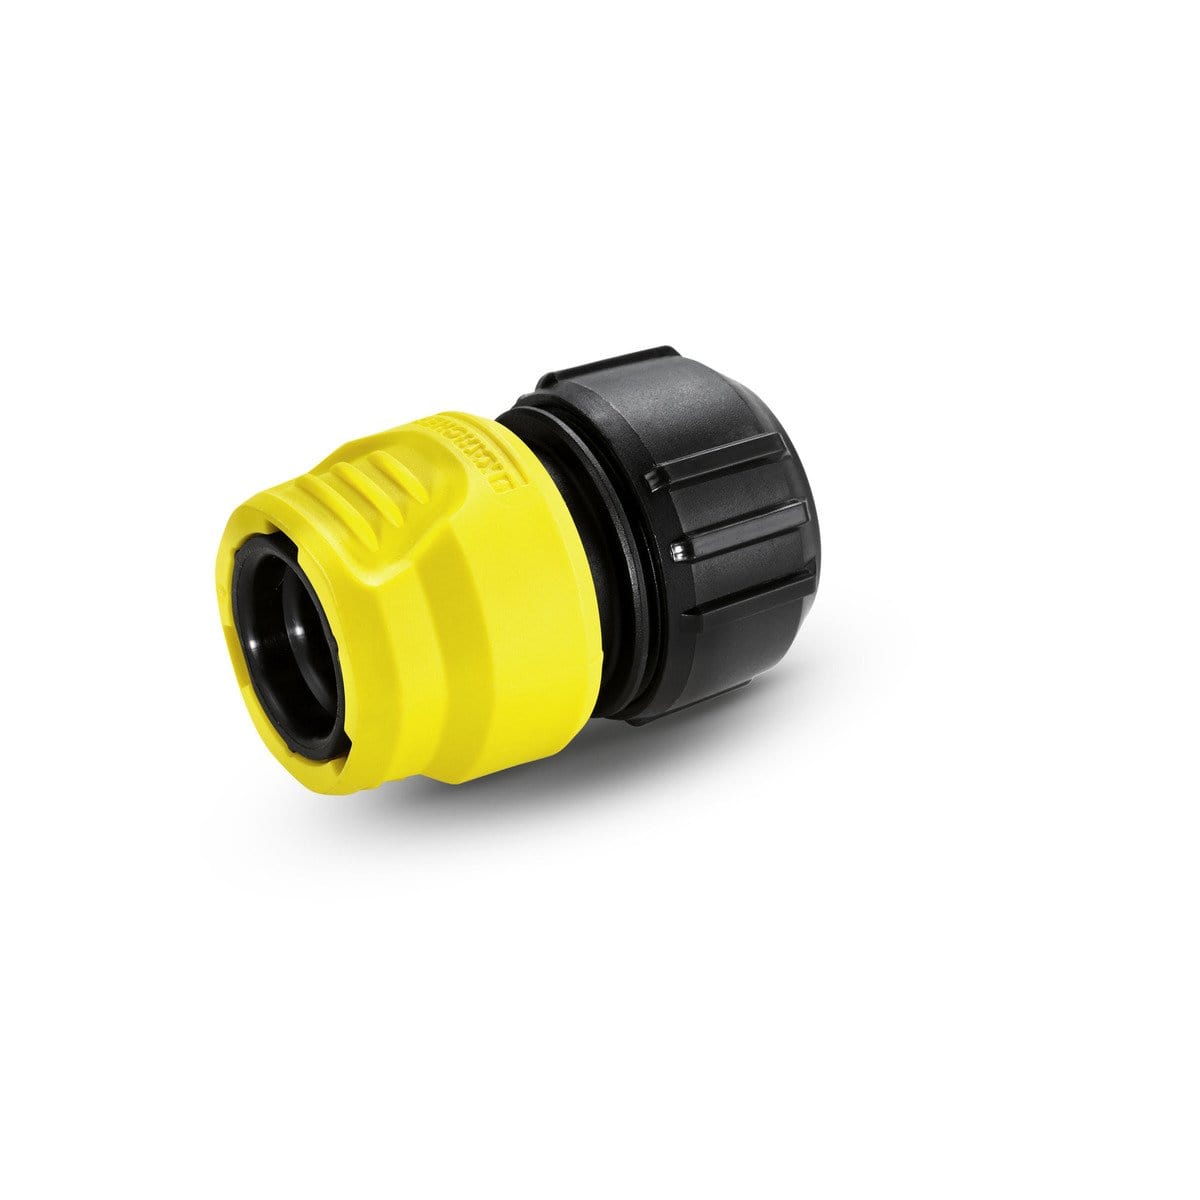 Karcher Universal Hose Connector With Aqua Stop | Supply Master | Accra, Ghana Tools Building Steel Engineering Hardware tool